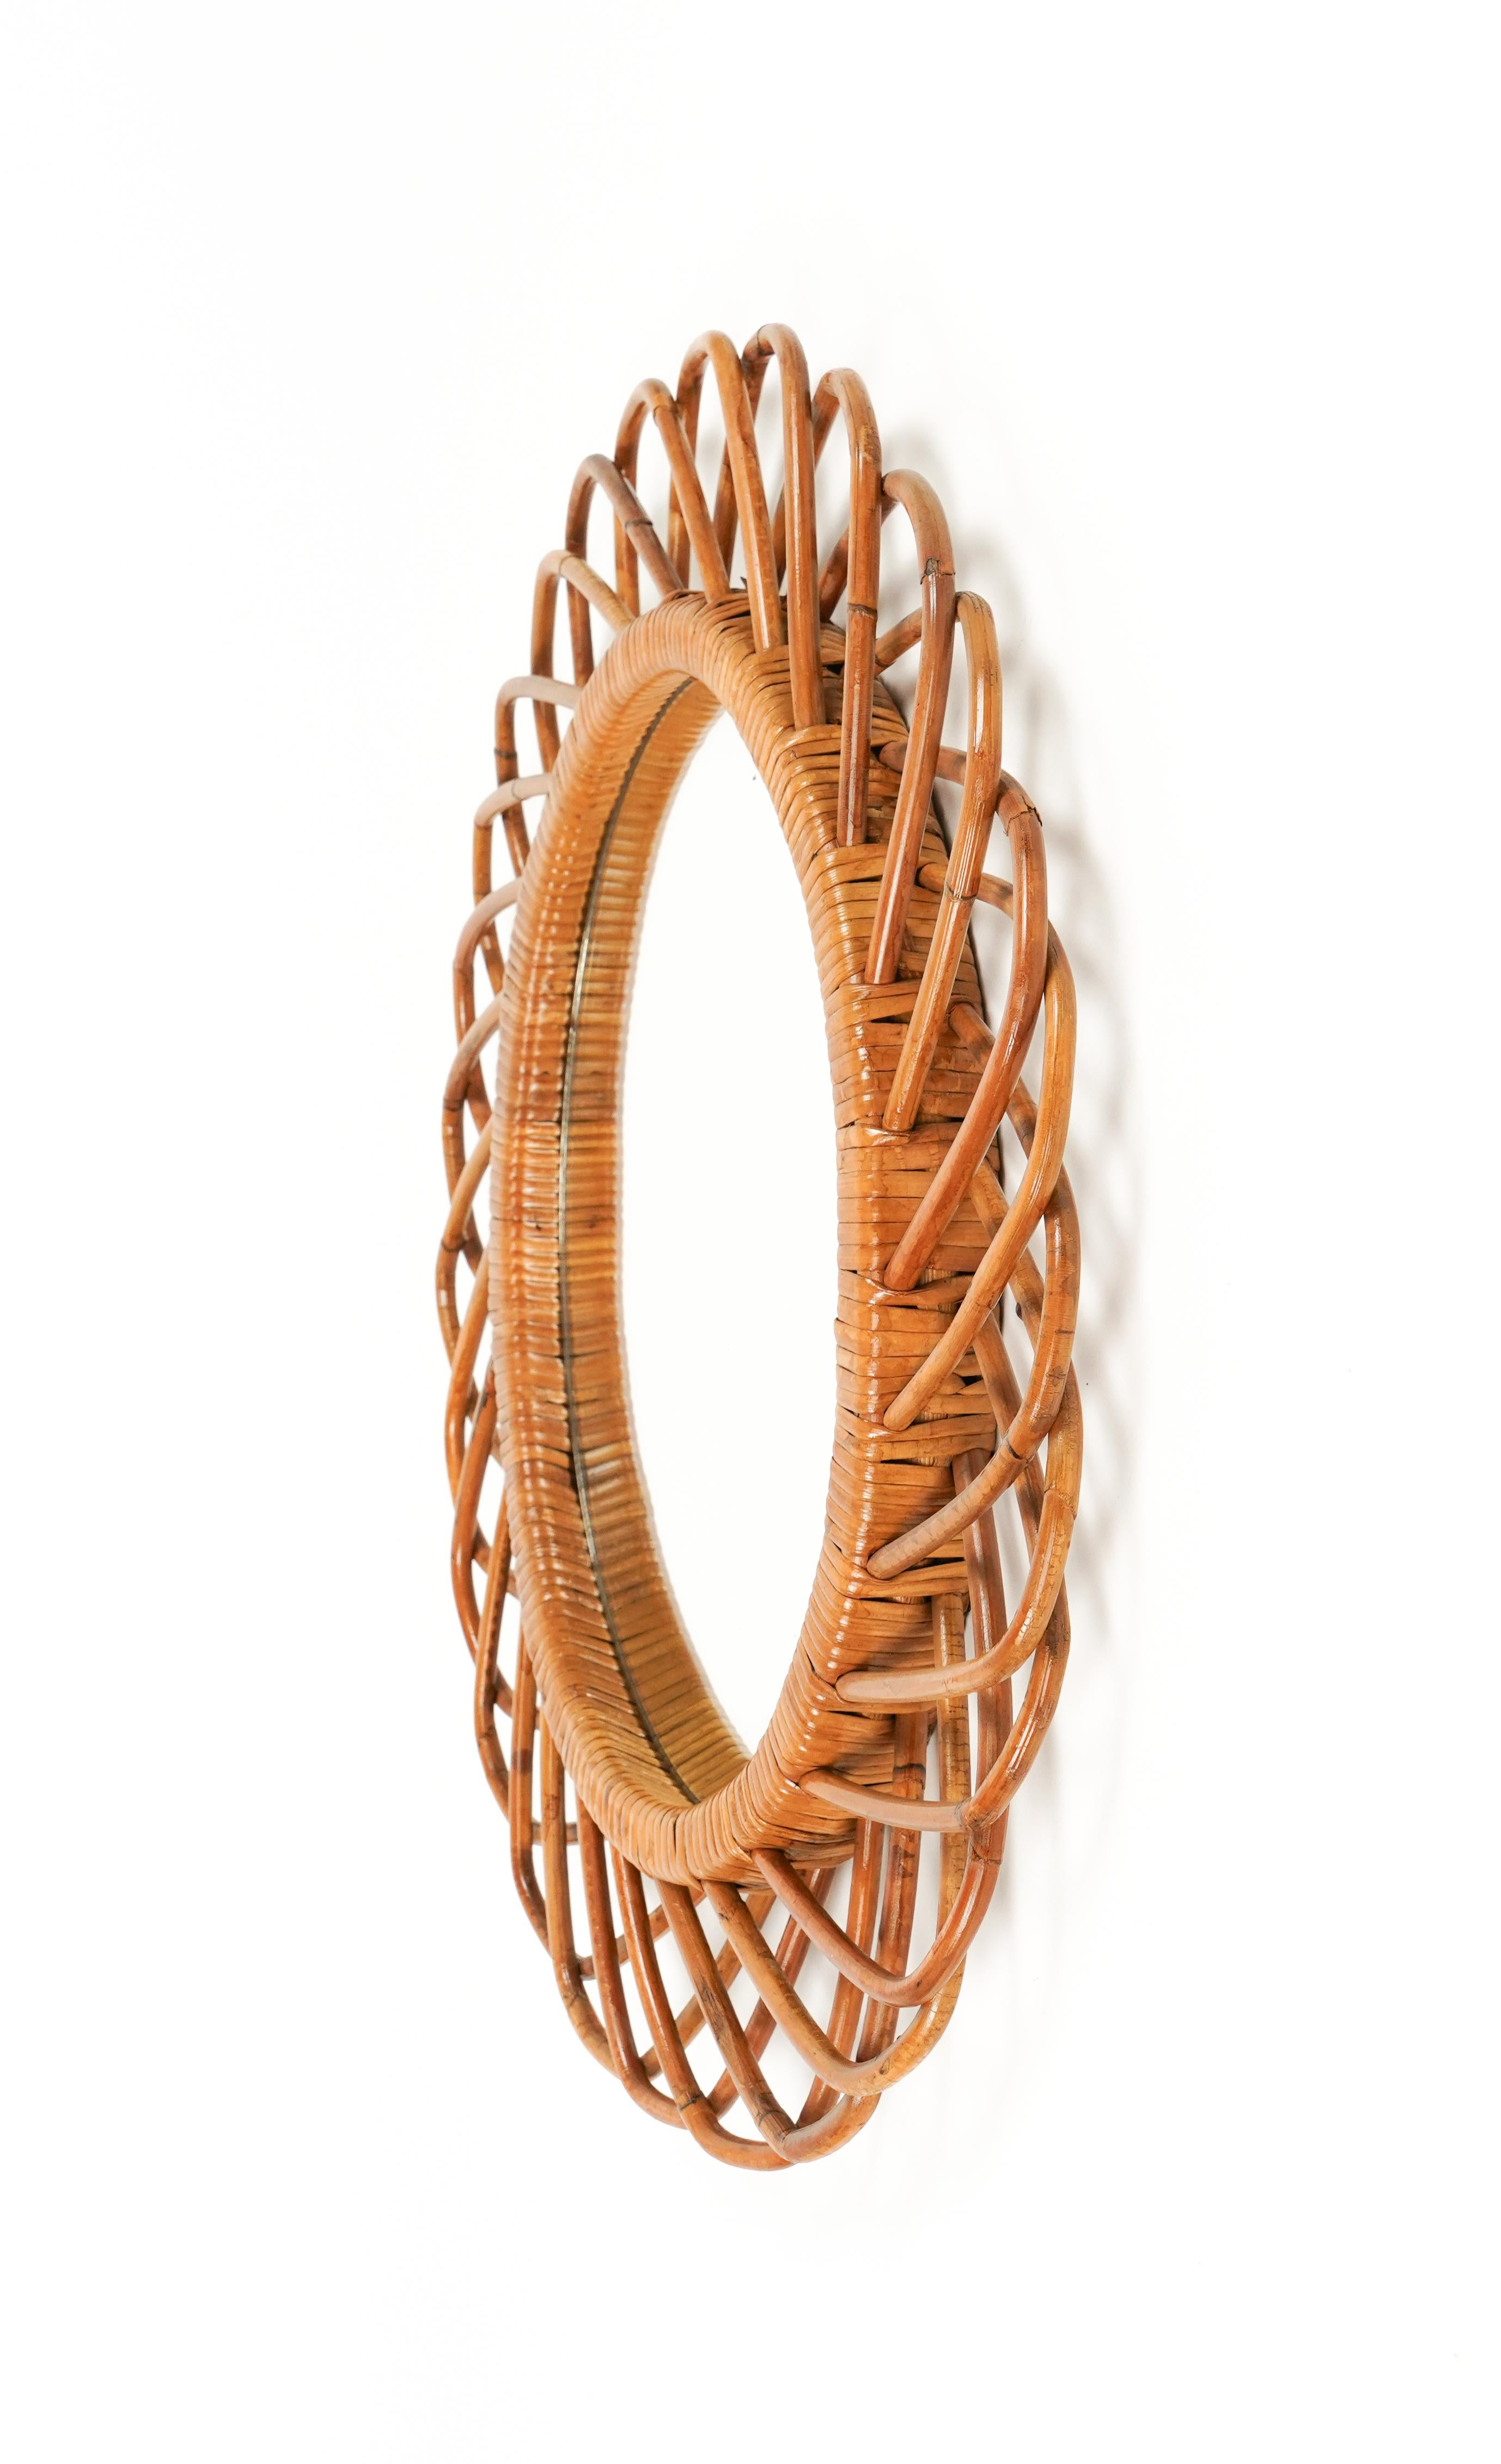 Midcentury Rattan and Bamboo Oval Wall Mirror, Italy 1960s For Sale 2